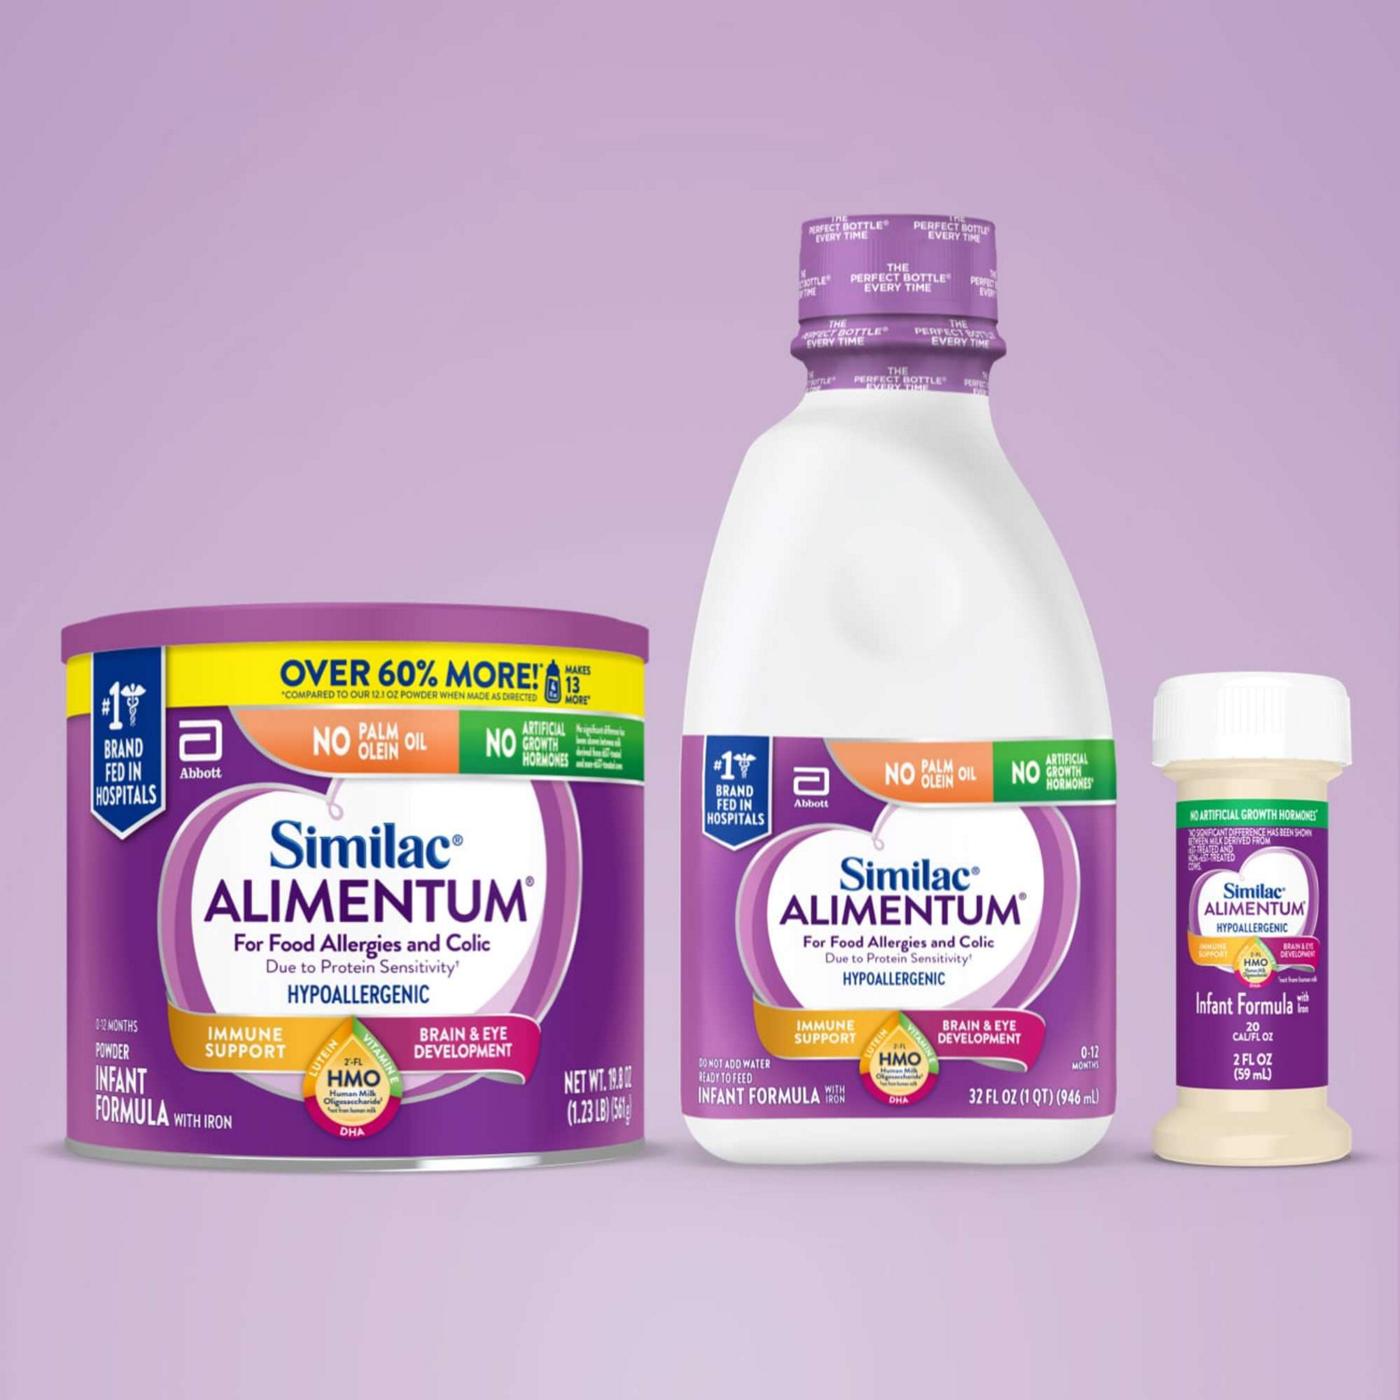 Similac Alimentum with 2’FL HMO, Ready-to-Feed Baby Formula, ; image 11 of 12